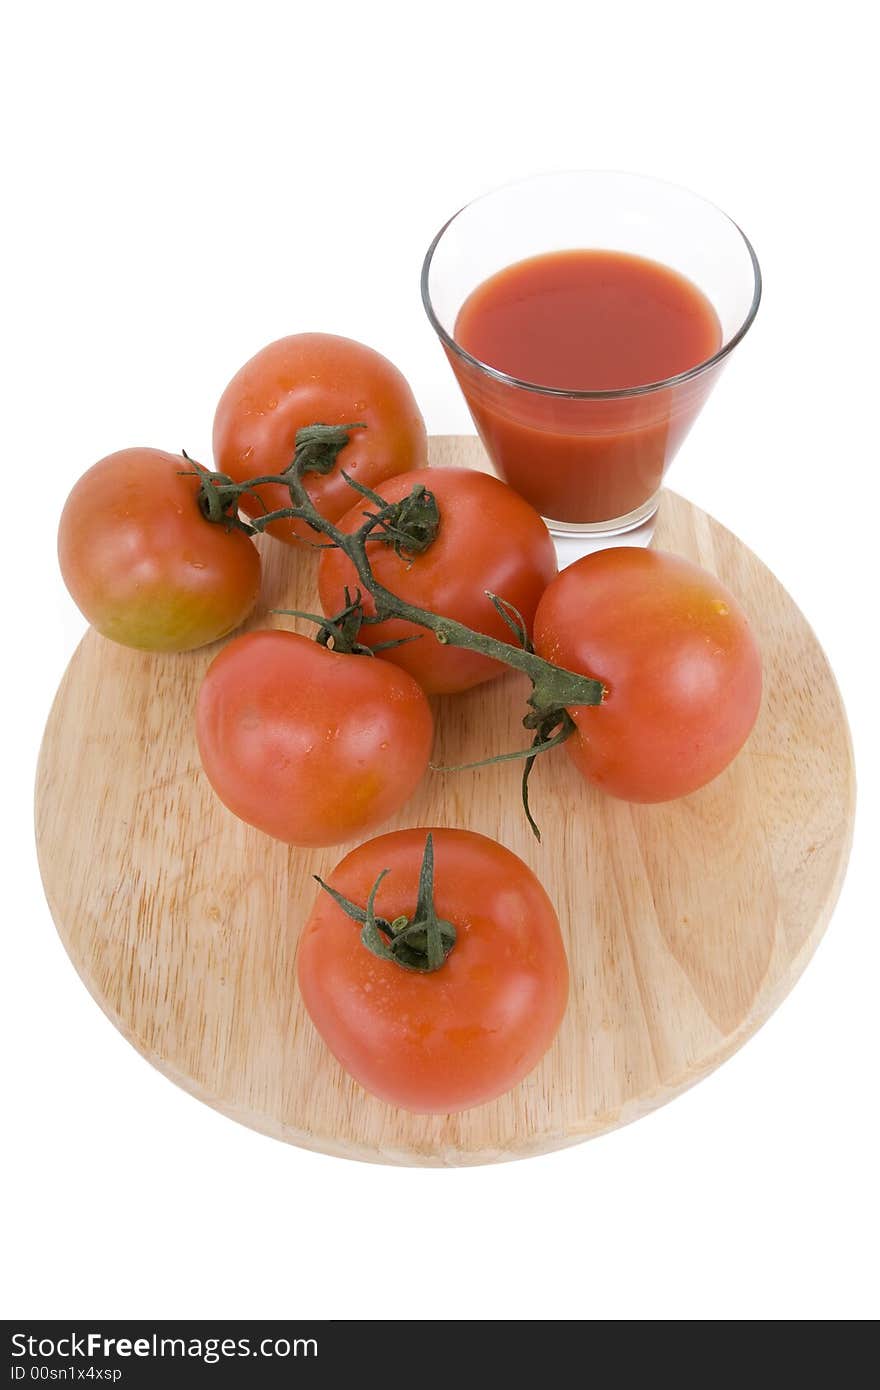 Tomatoe juice is very refreshing and rich of vitamins